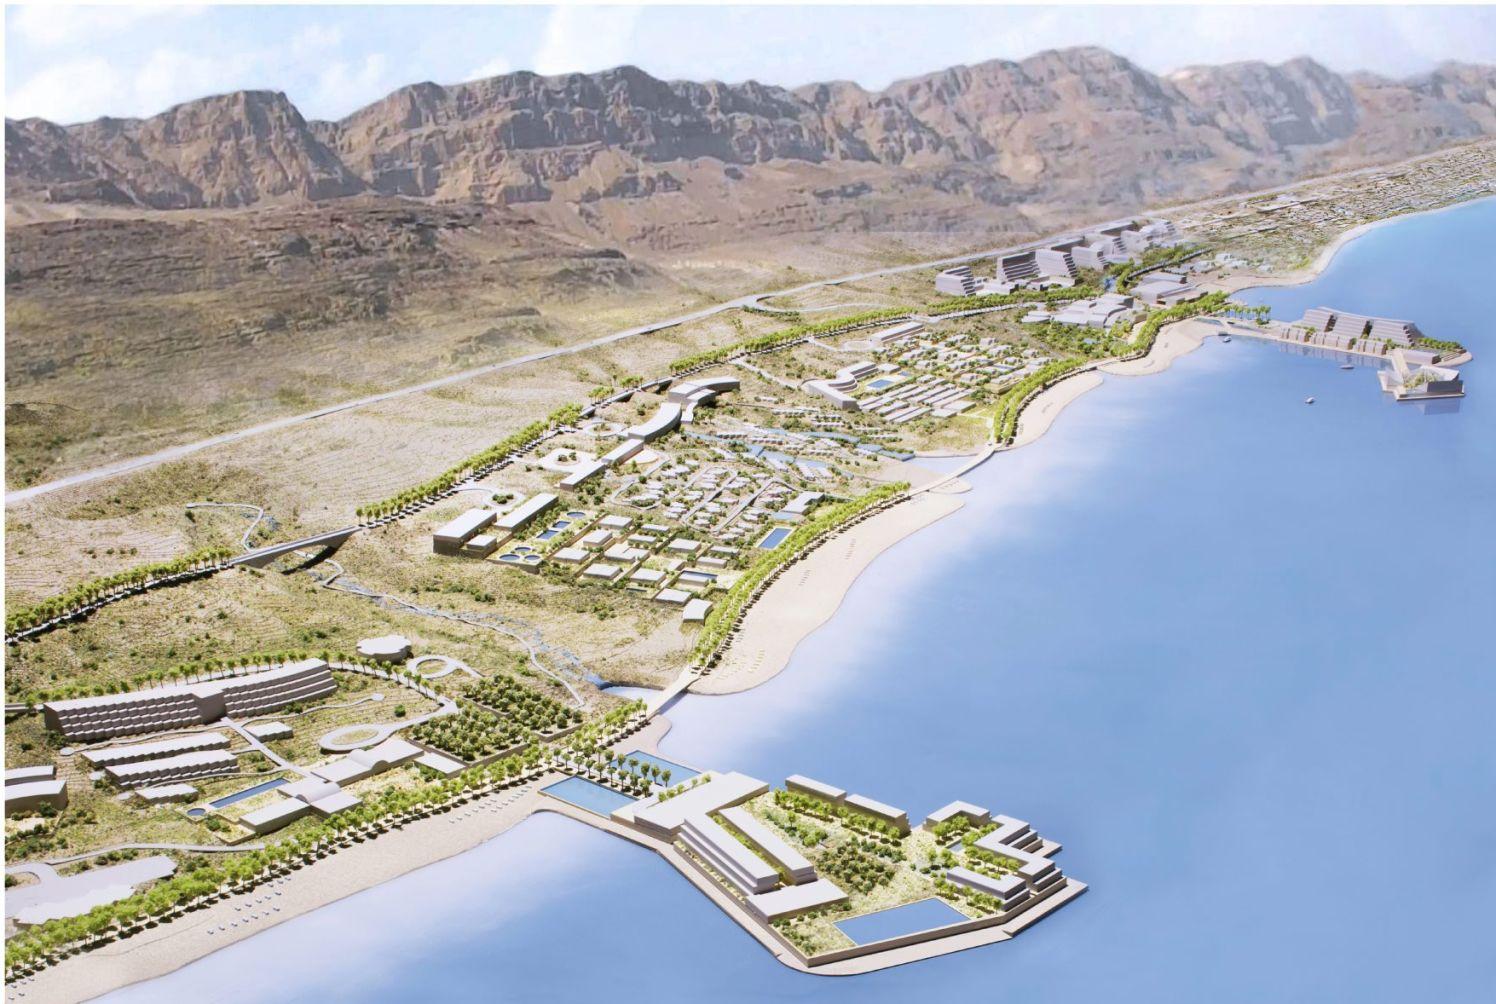 ” An upgraded beachside promenade will link all the new amenities across the resort / Moshe Safdie Architects 